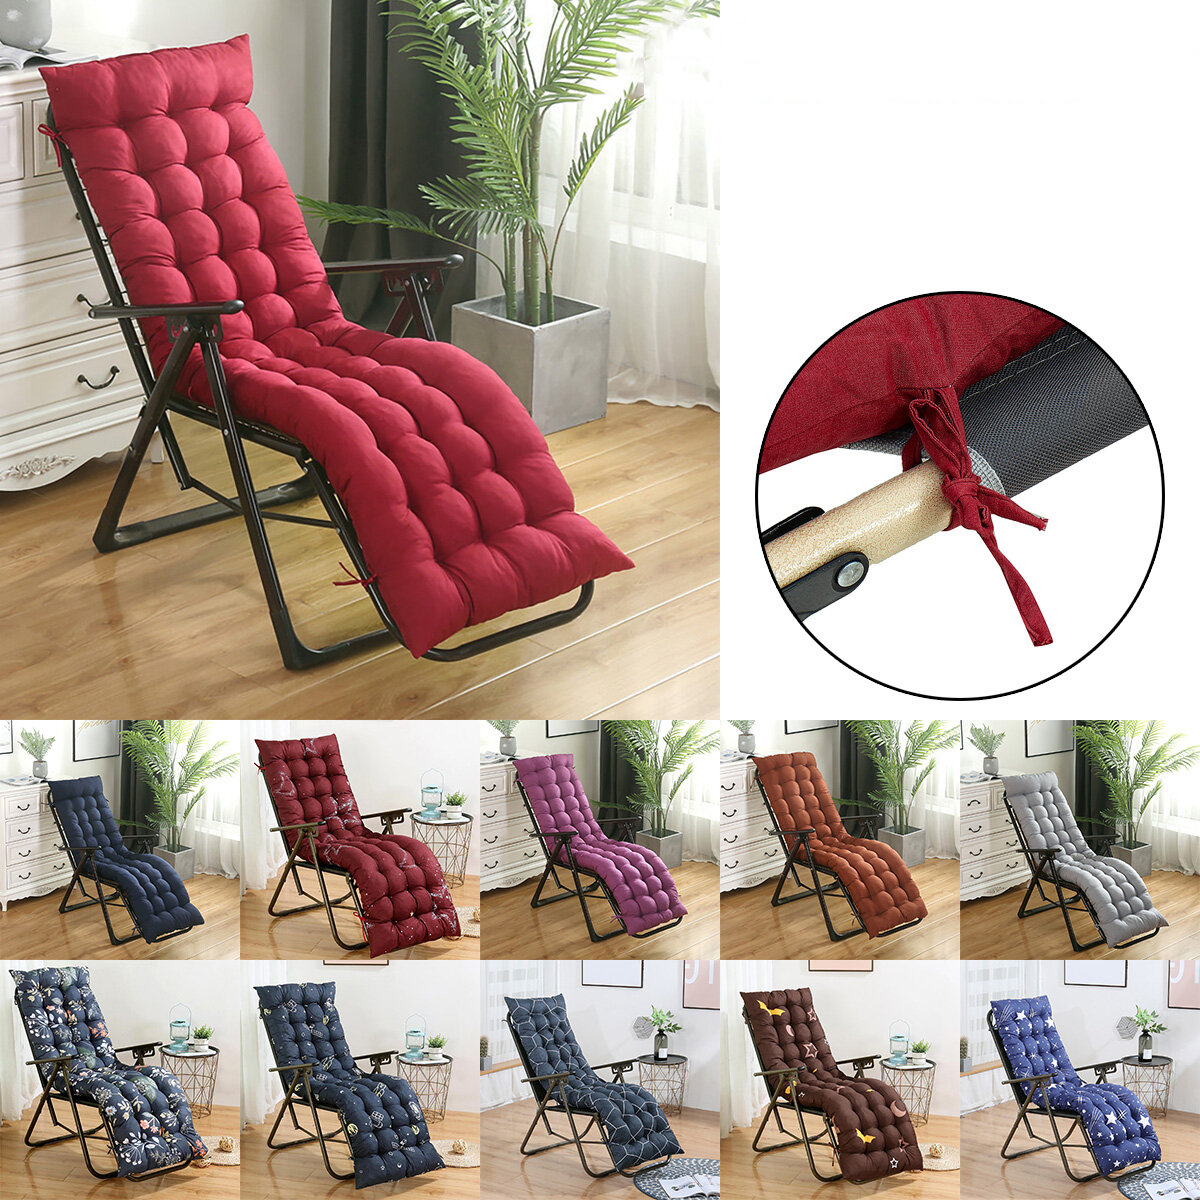 Universal Lounge Chaise Chair Cushion Tufted Soft Comfort Deck Chaise High Back Cushion Outdoor Indo